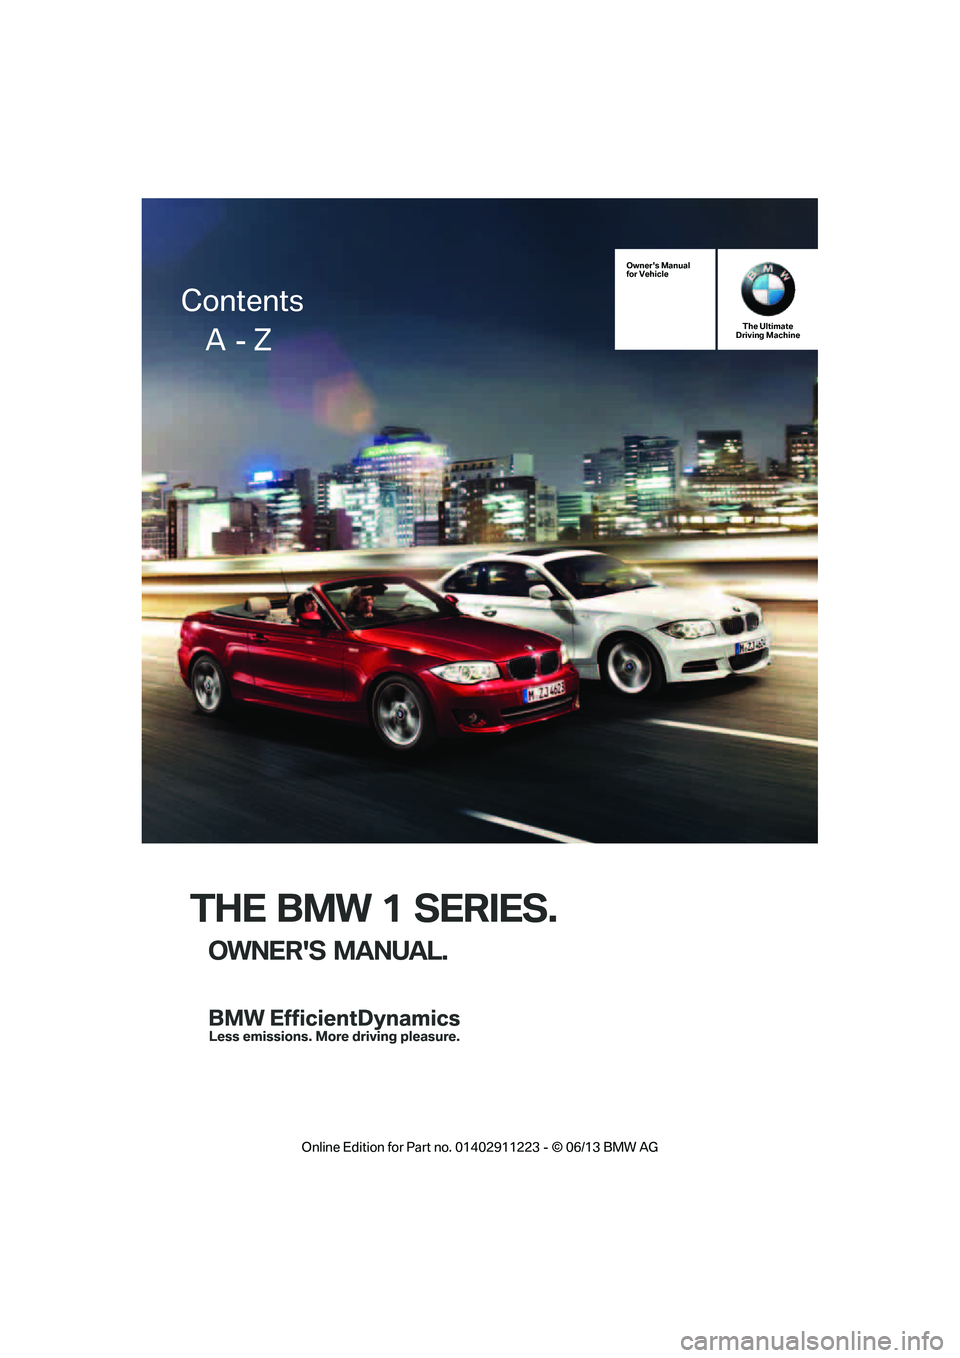 BMW 128I 2013  Owners Manual THE BMW 1 SERIES.
OWNERS MANUAL.
Owners Manual
for VehicleThe Ultimate
Driving Machine
Contents
     A  - Z

�2�Q�O�L�Q�H �(�G�L�W�L�R�Q �I�R�U �3�D�U�W �Q�R� ����������� � �